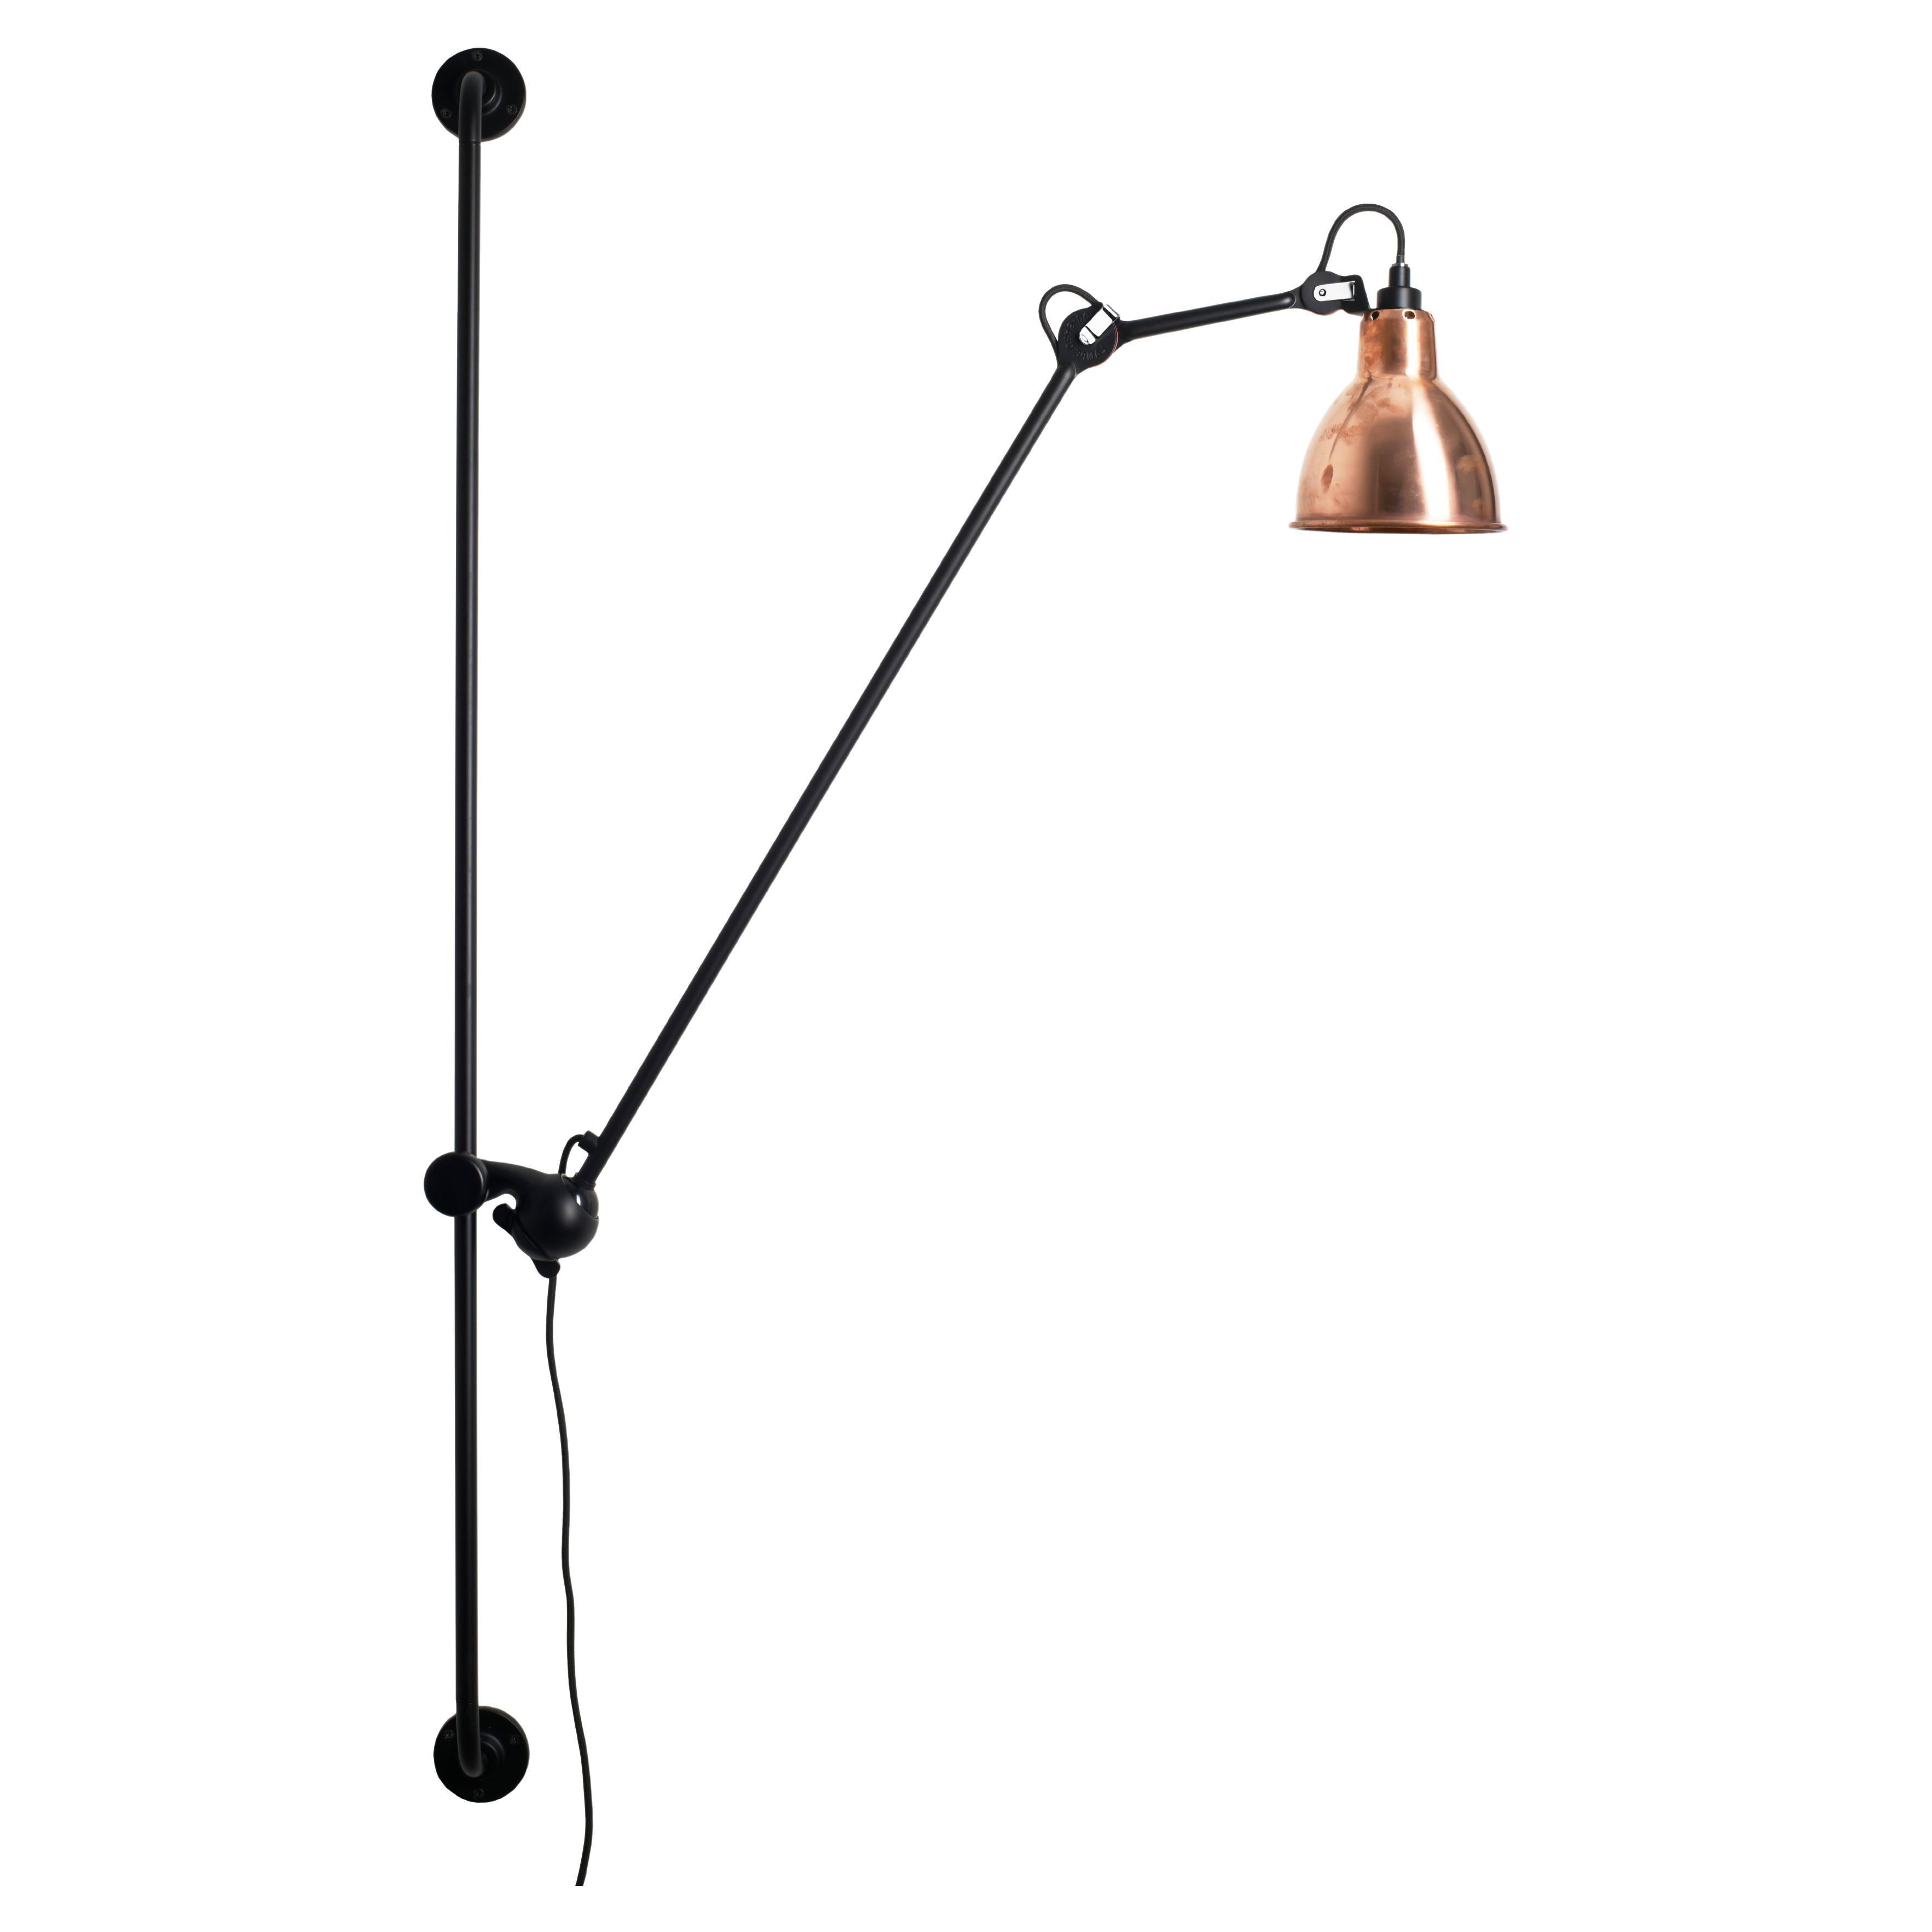 DCW Editions La Lampe Gras N°214 Round Wall Lamp in Black Arm & Raw Copper Shade For Sale